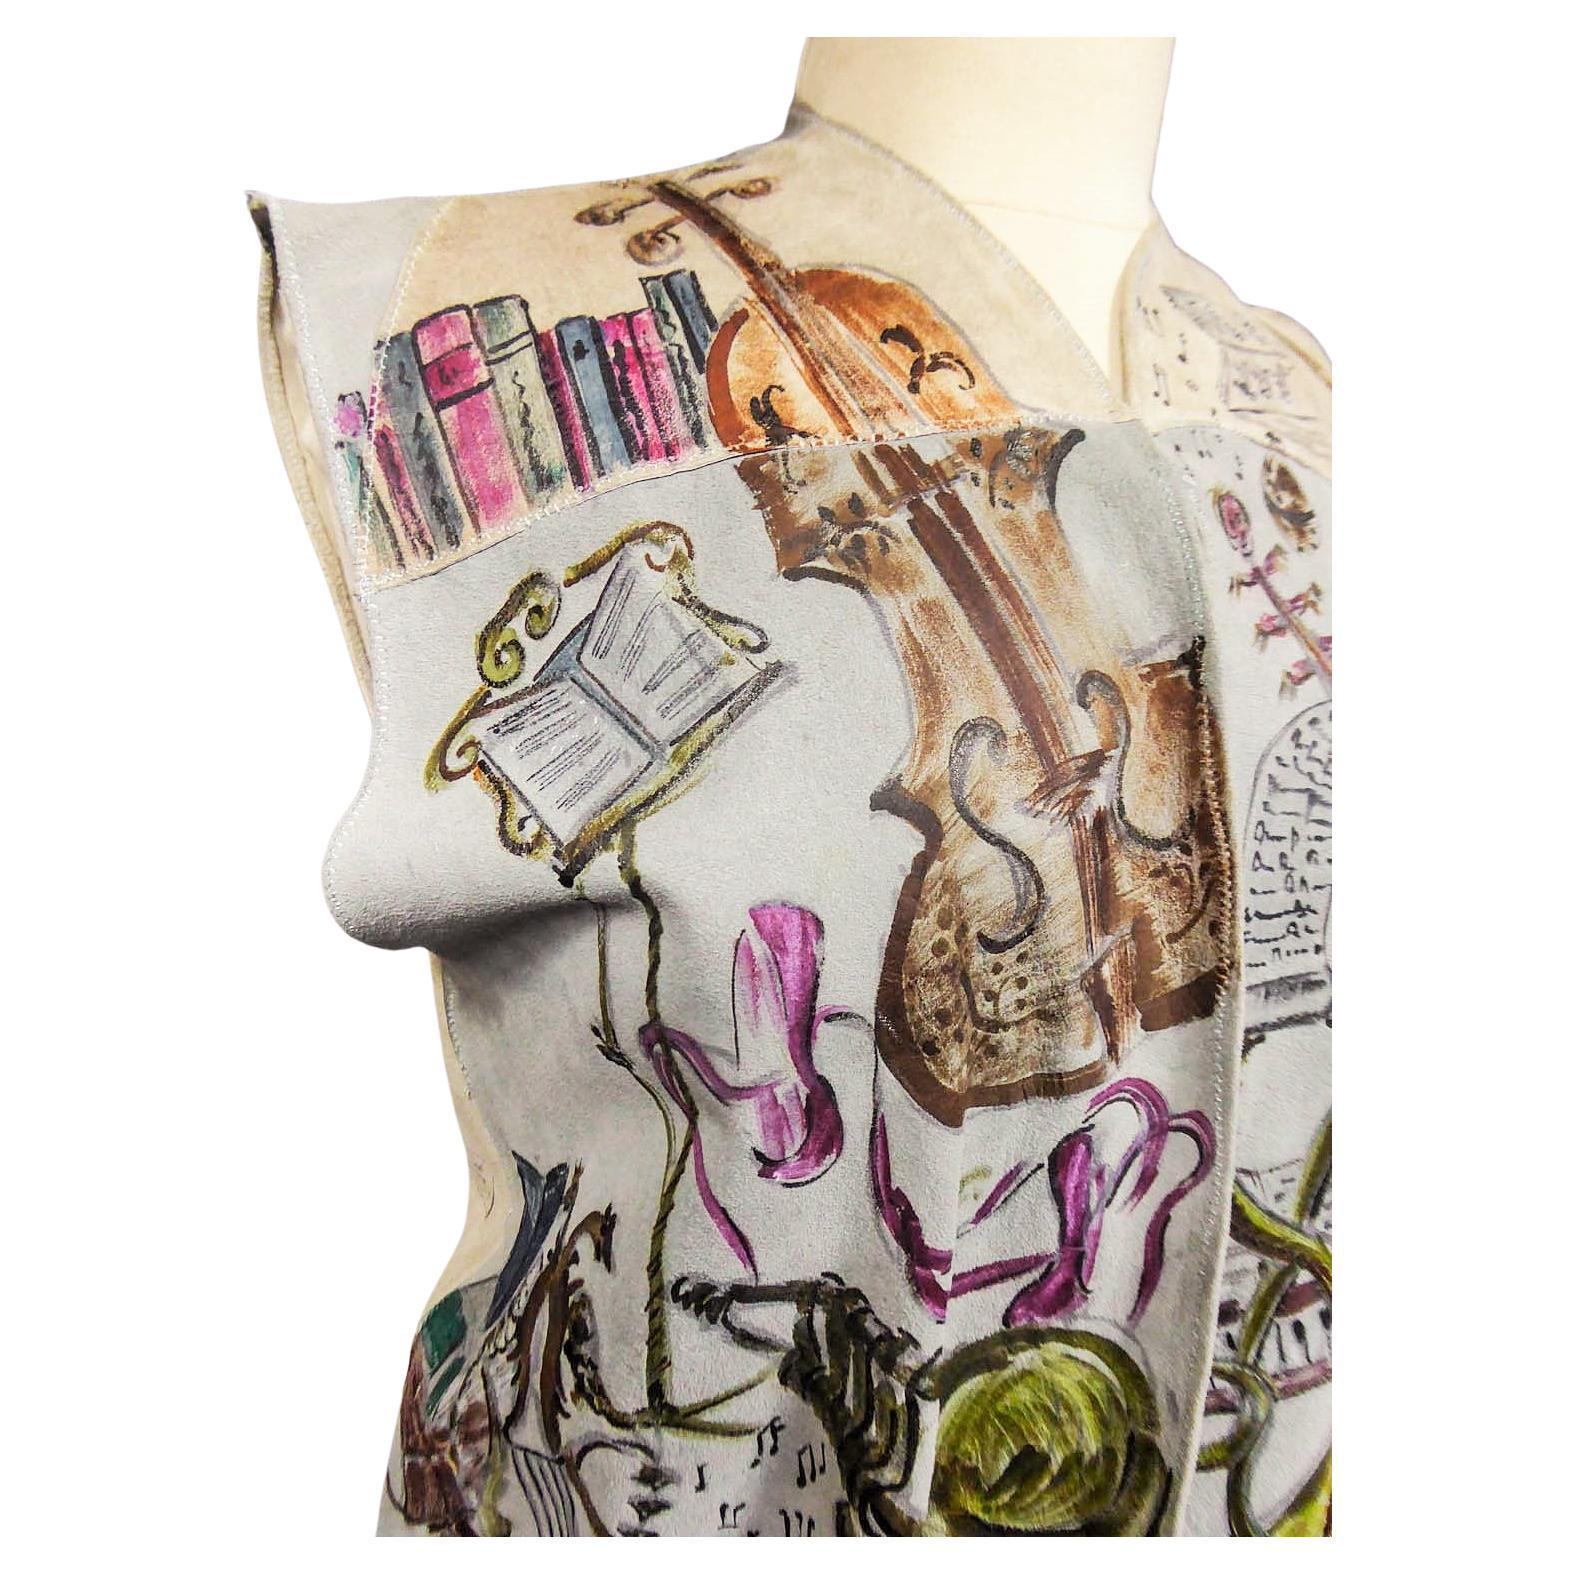 Circa 1940/1950
France

Light blue and beige suede sleeveless waistcoat entirely hand-painted on a musical theme probably signed by René Gruau. Commissioned for a play in the late 1940s. Two brown suede pockets on the front represent the body of a